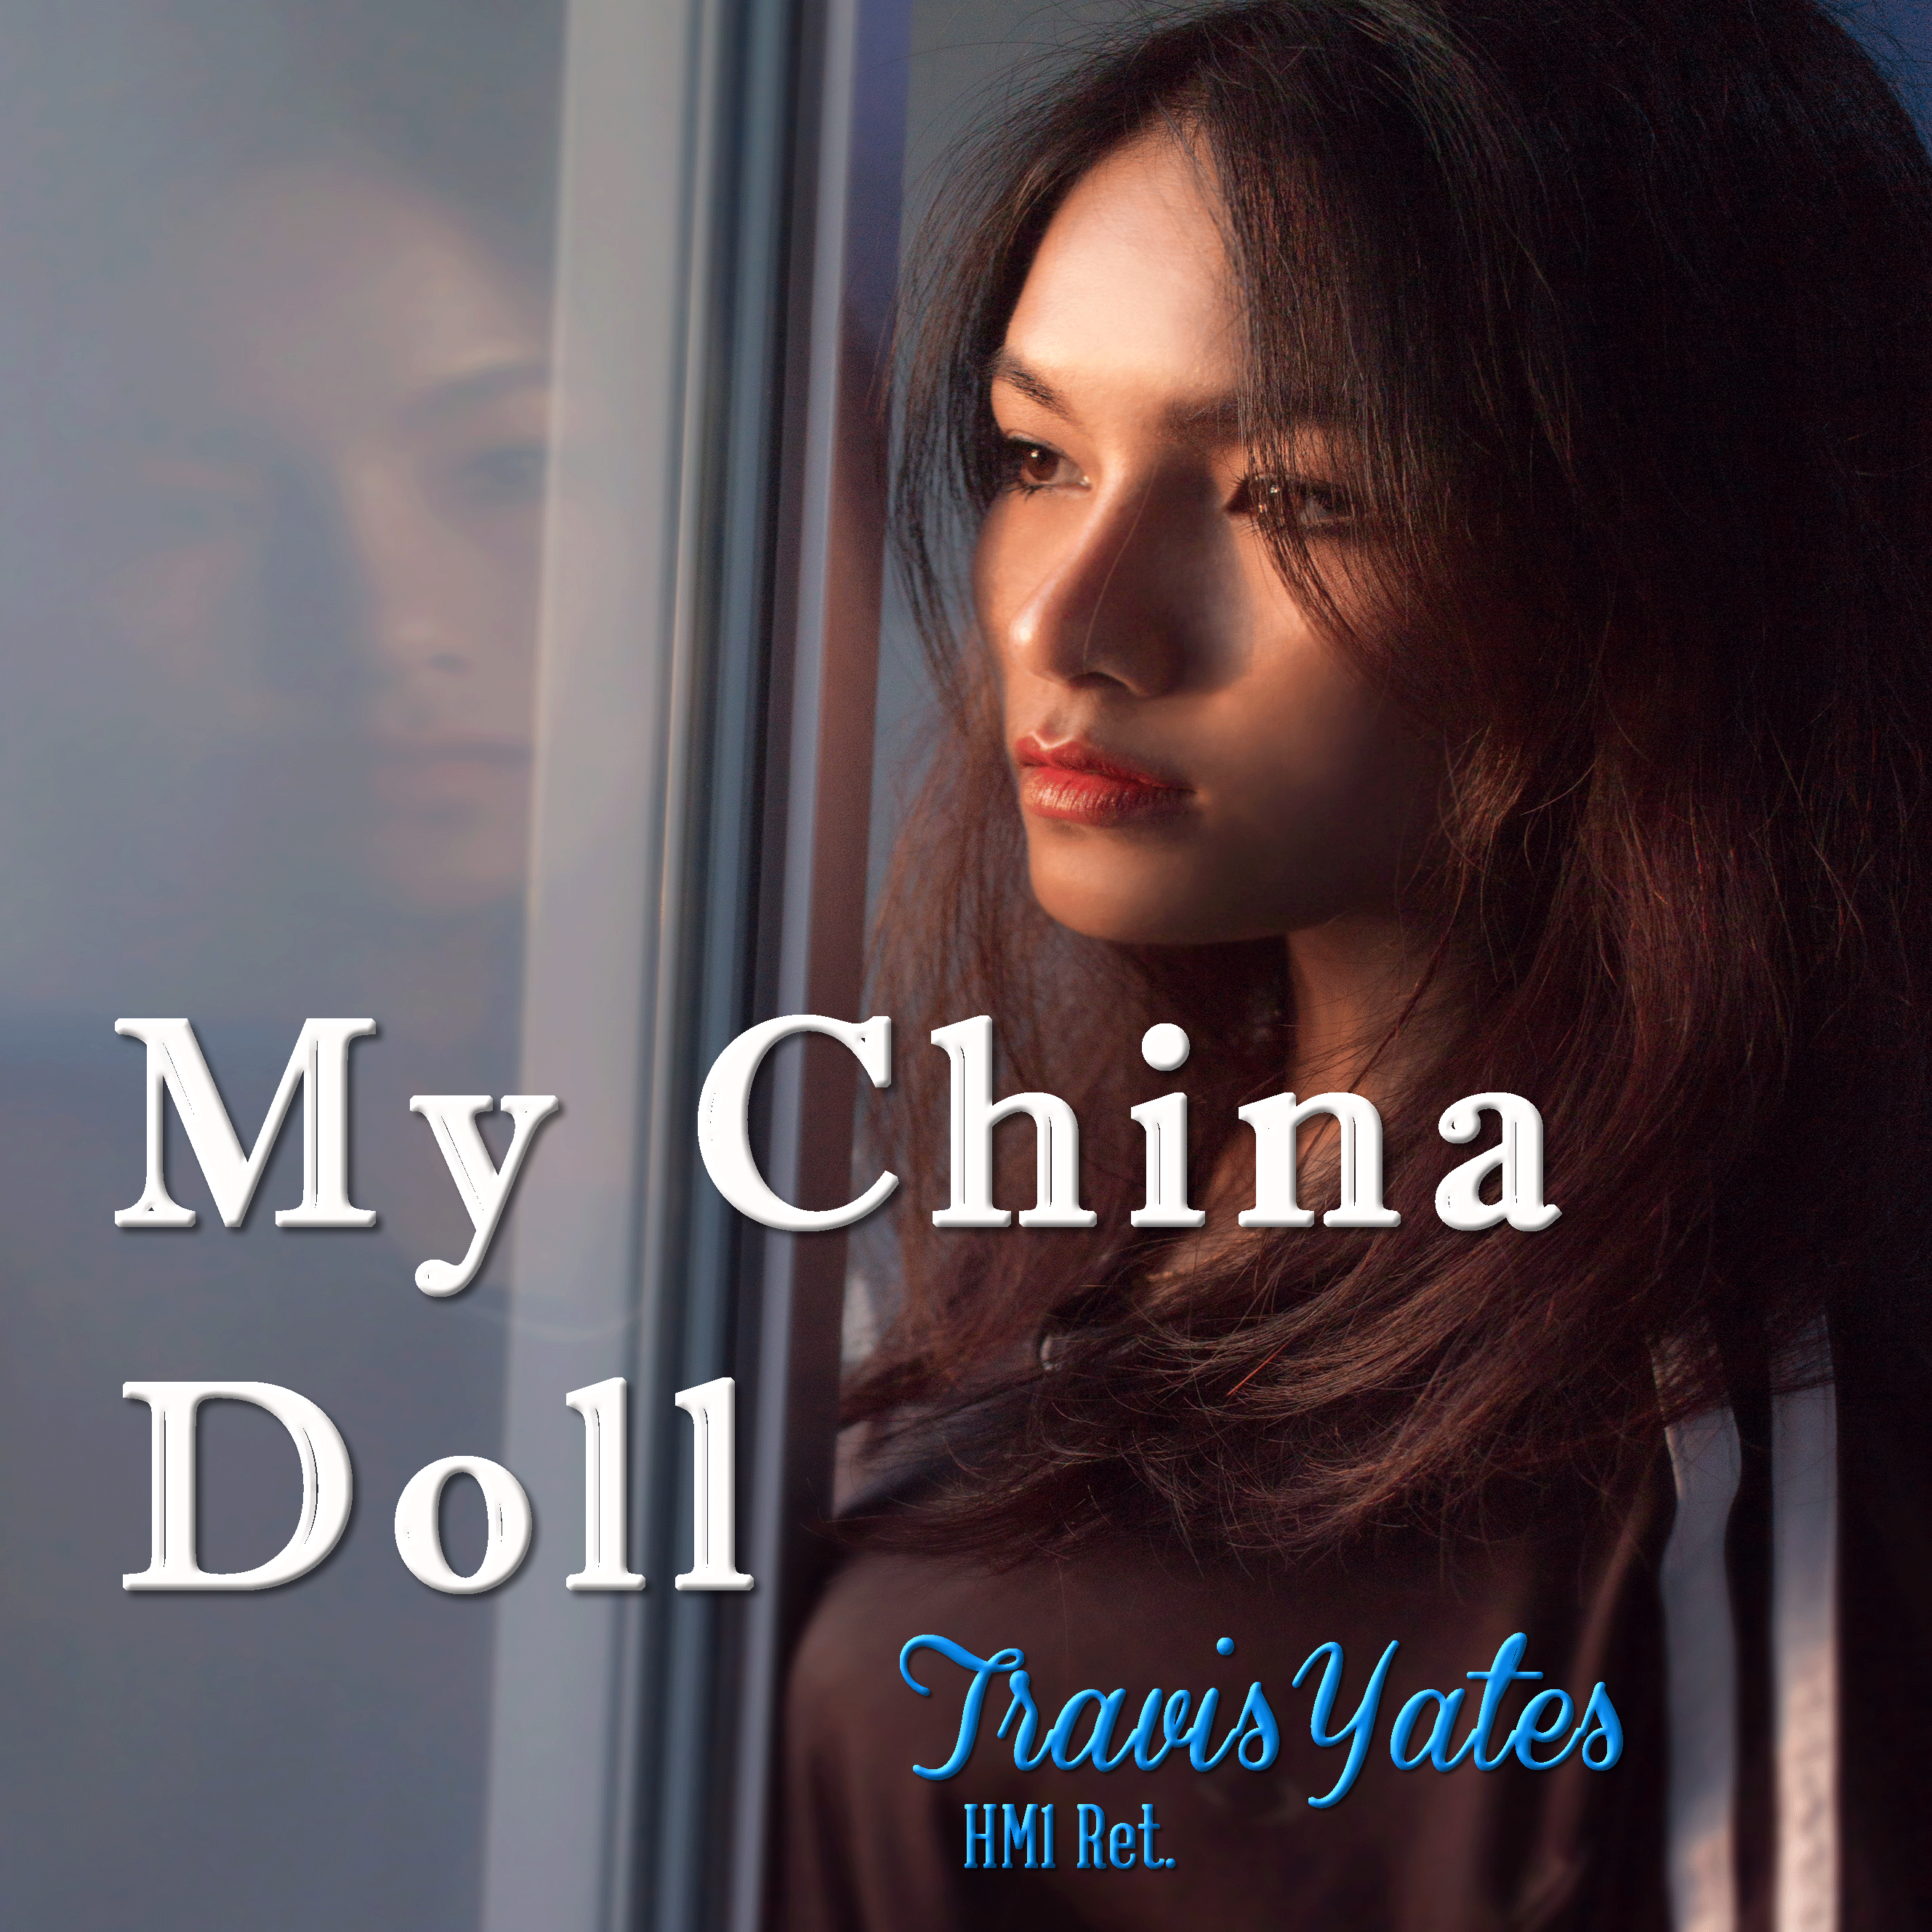 My China Doll by Travis Yates HM1 Ret. Singer - Songwriter - Guitarist - Bassist